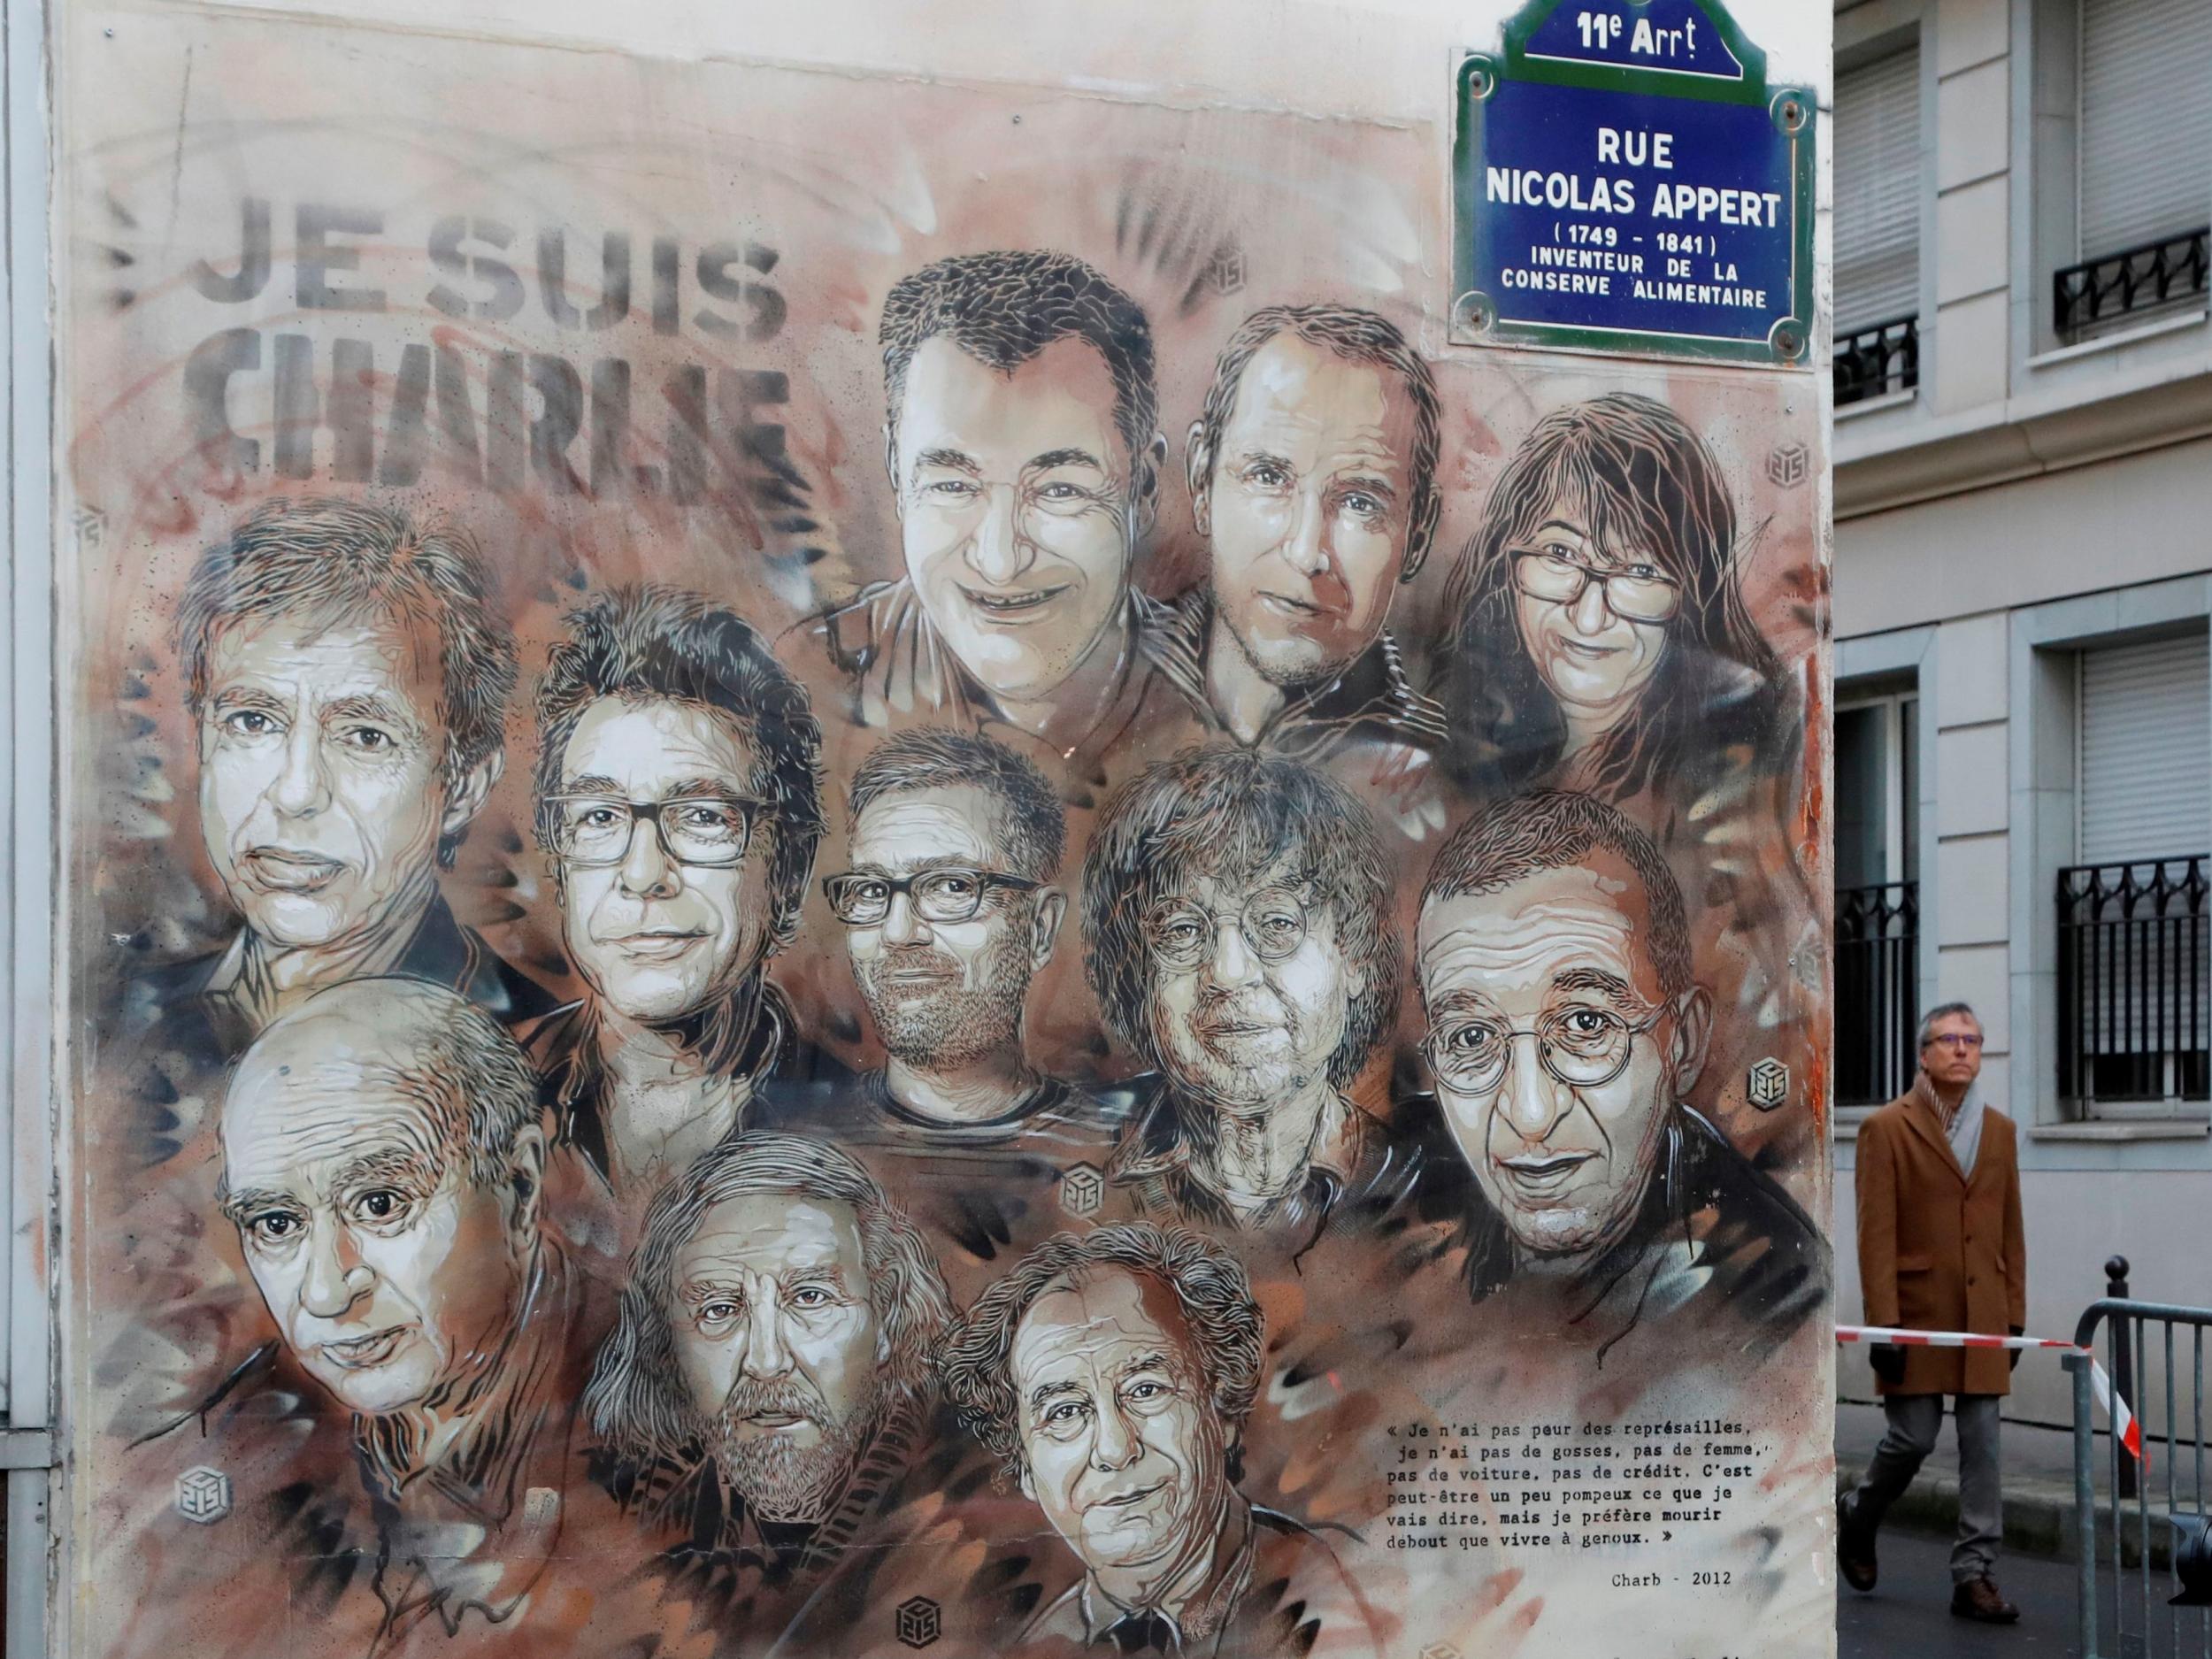 A mural near the Charlie Hebdo offices in Paris depicts staff who were killed in the January 2015 attacks